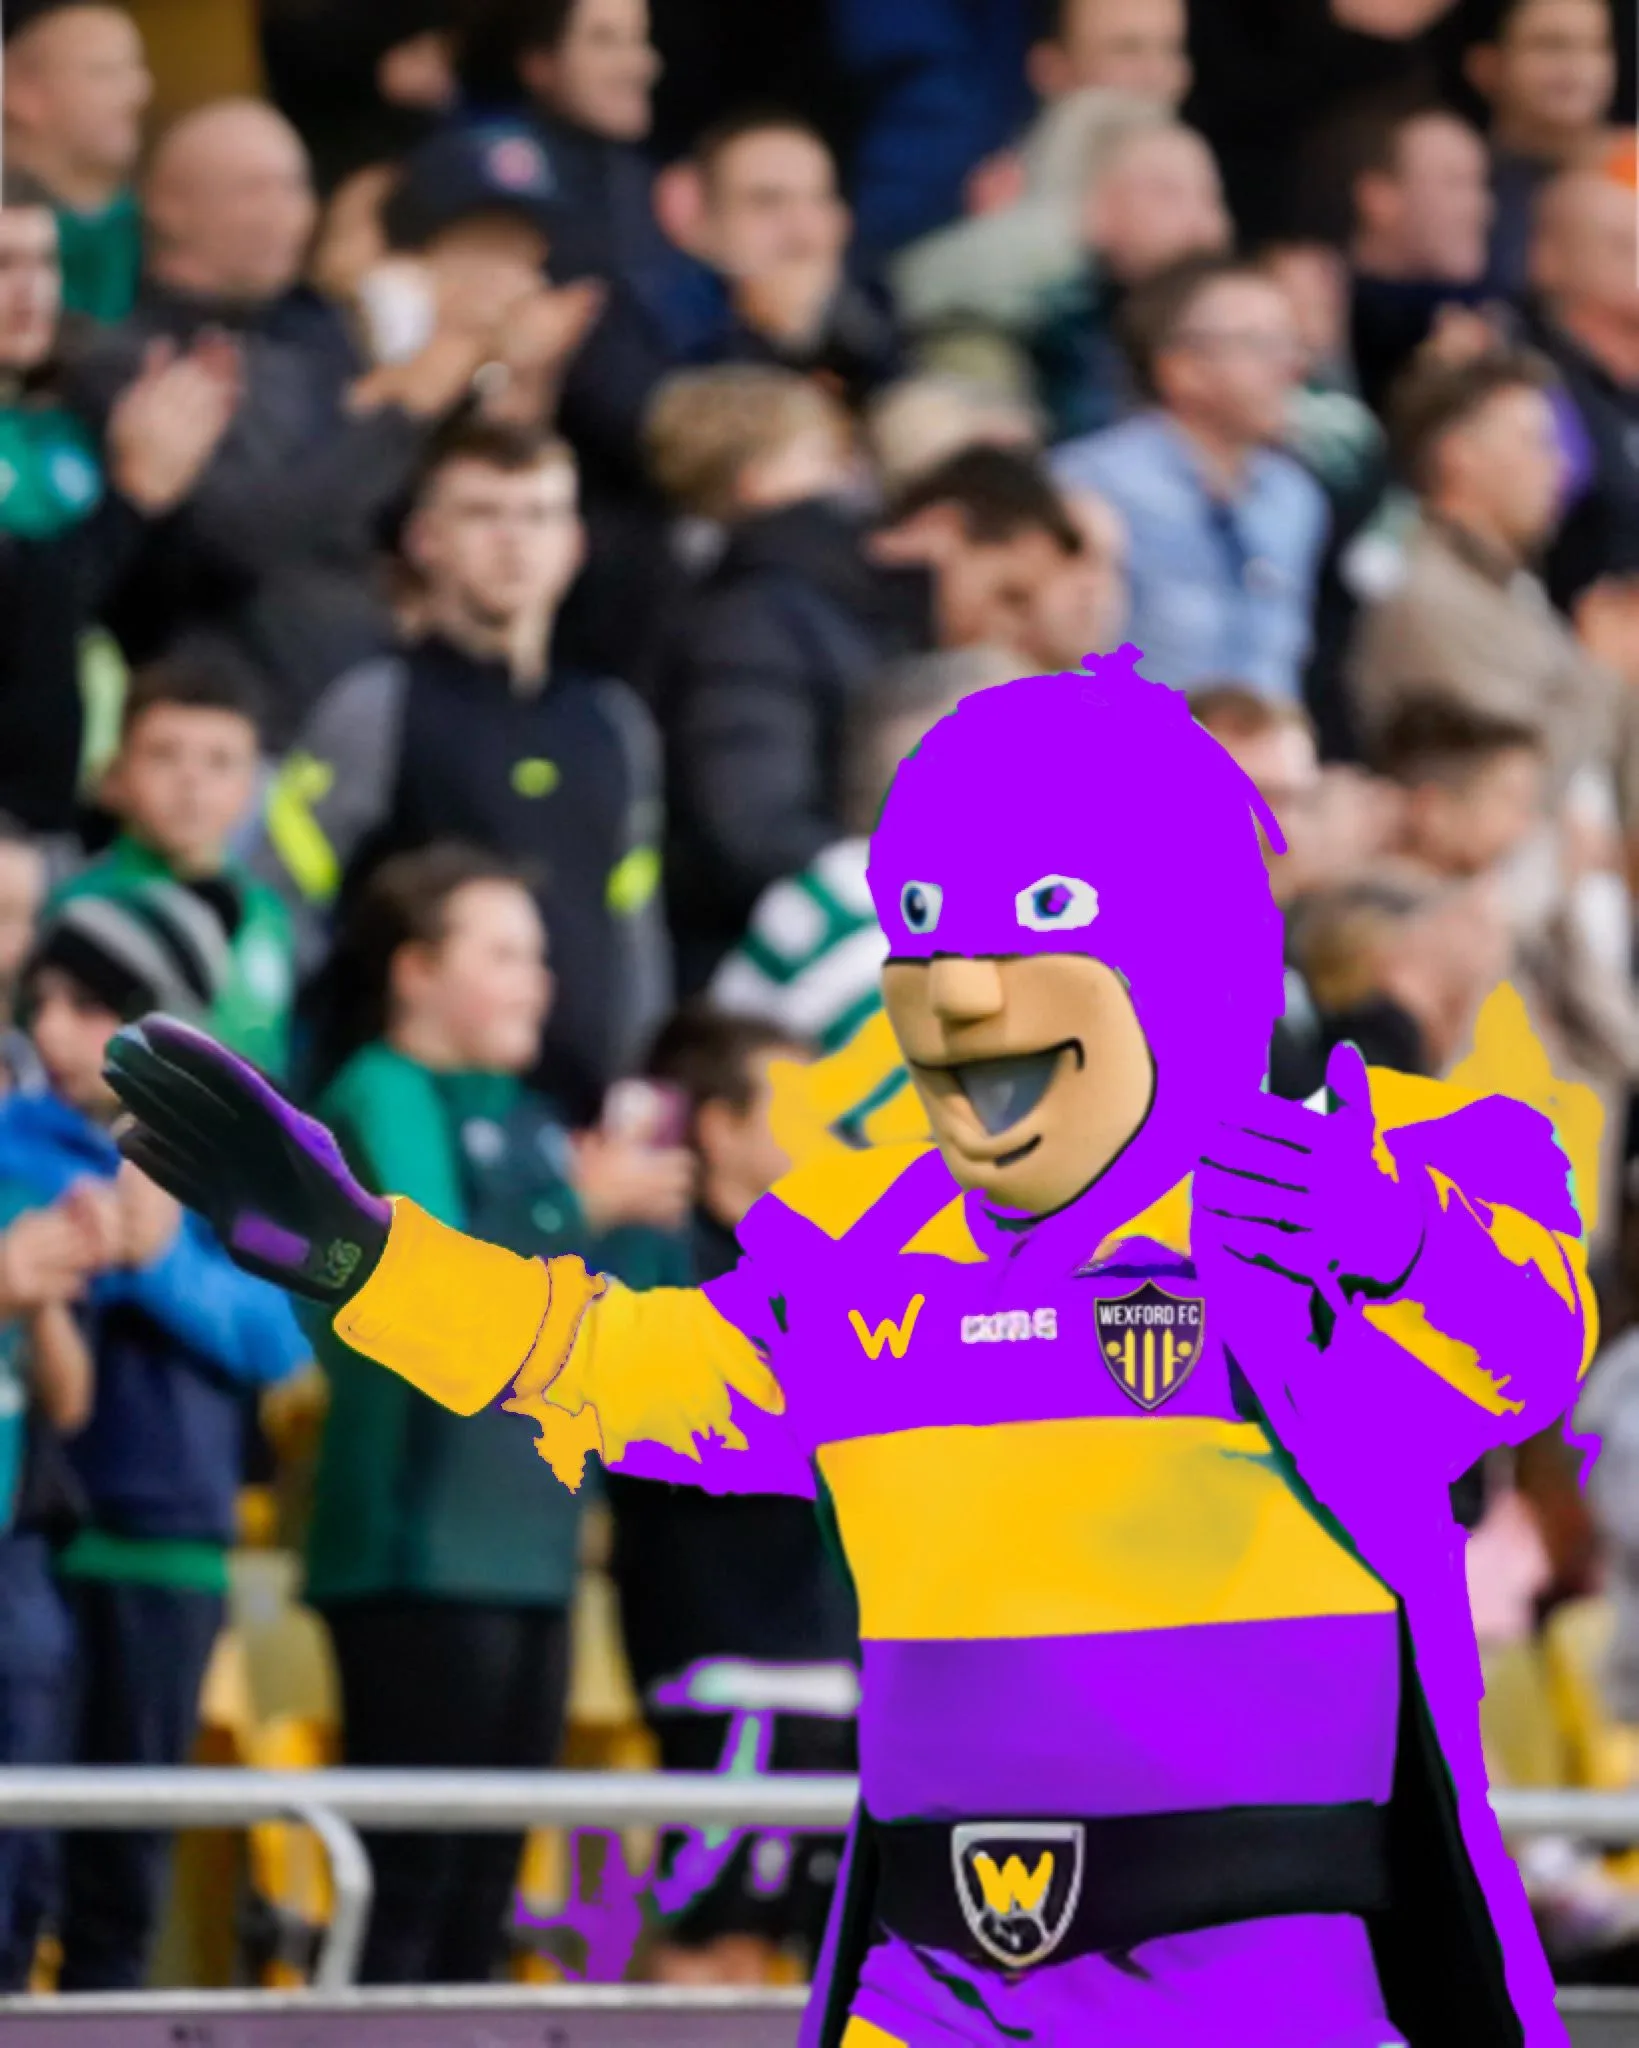 Wexford FC Announce “Bold” New Signing: Hooperman, the Shamrock Rovers Mascot